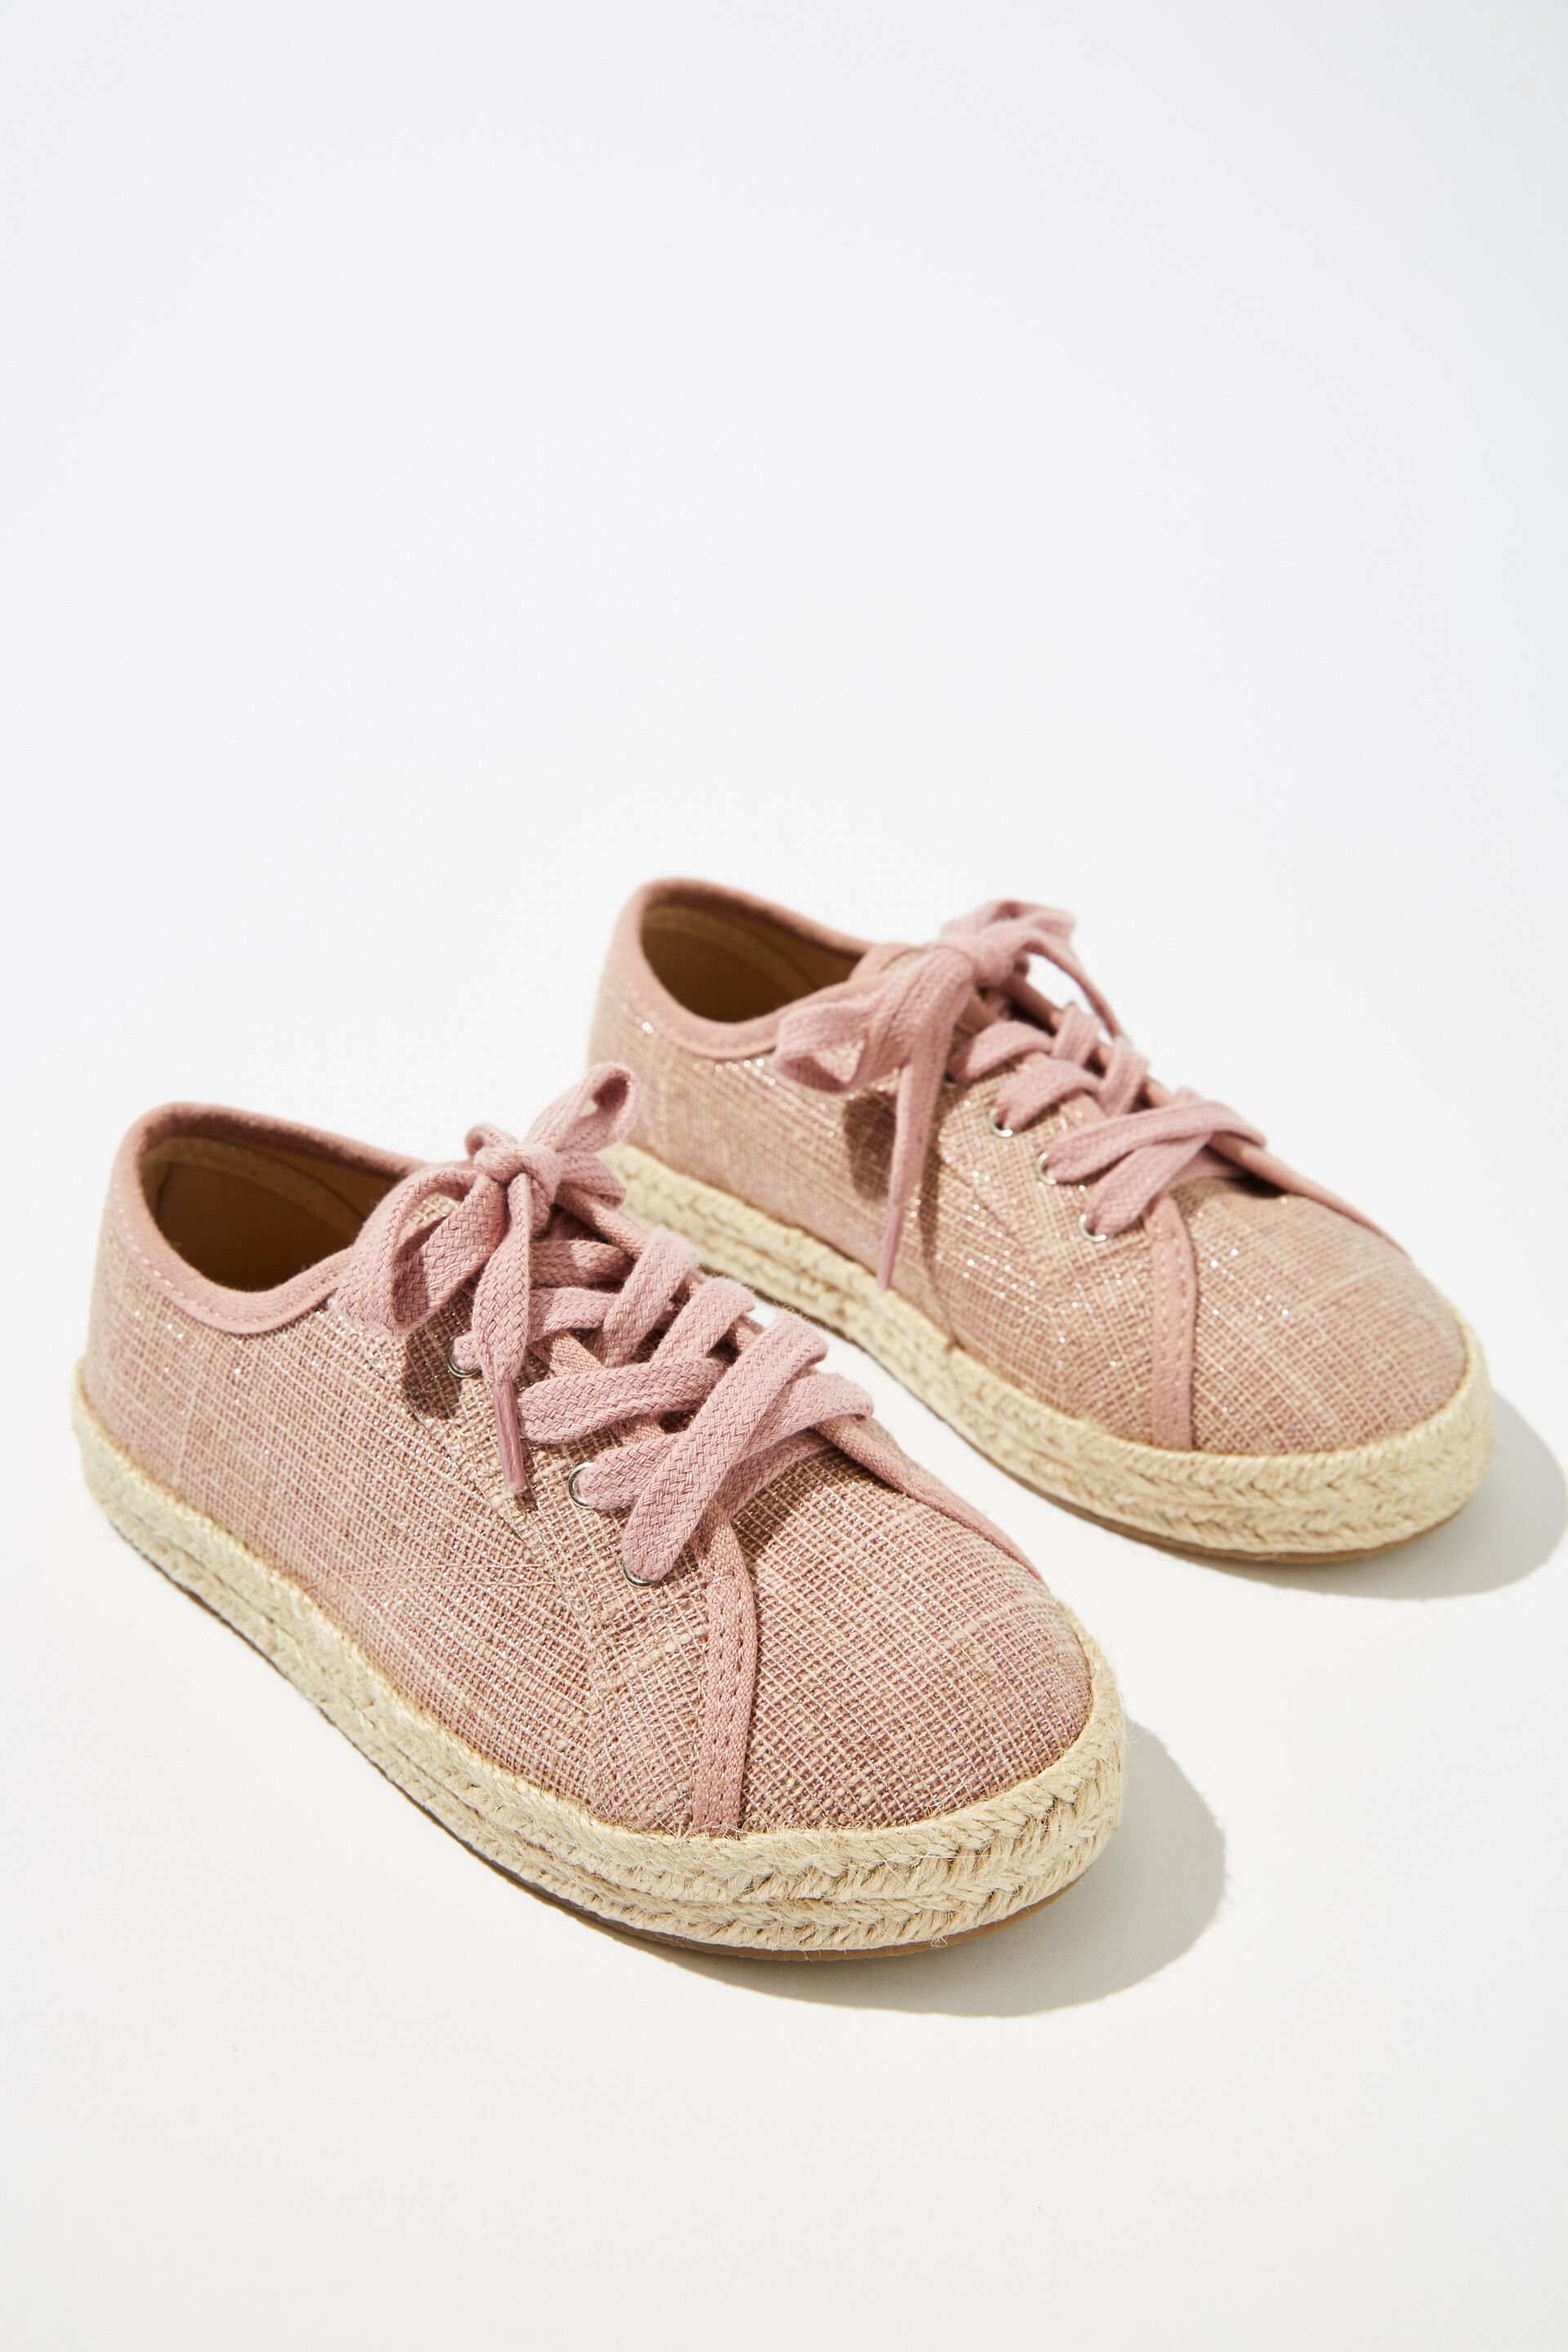 cotton on kids shoes